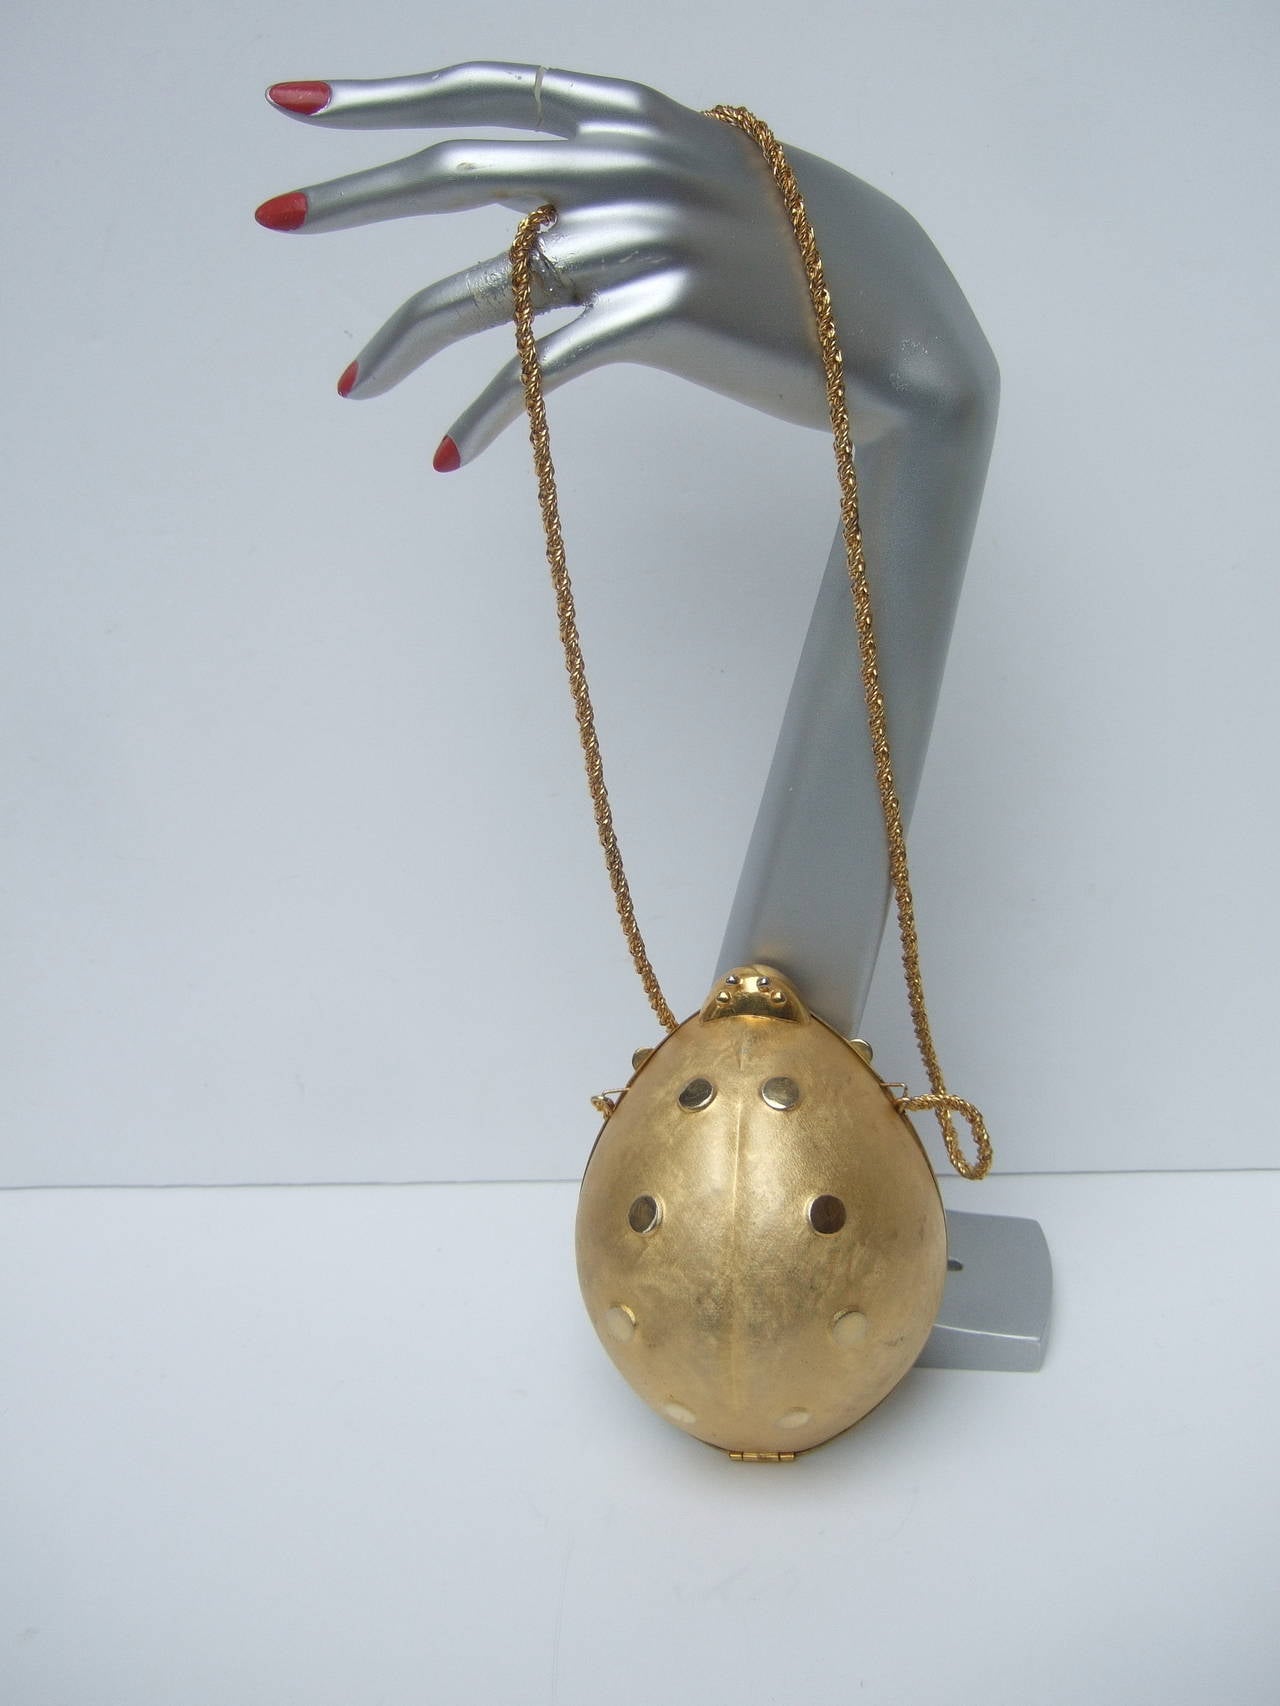 Women's Opulent Gilt Metal Lady Bug Evening Bag Made in Italy c 1970